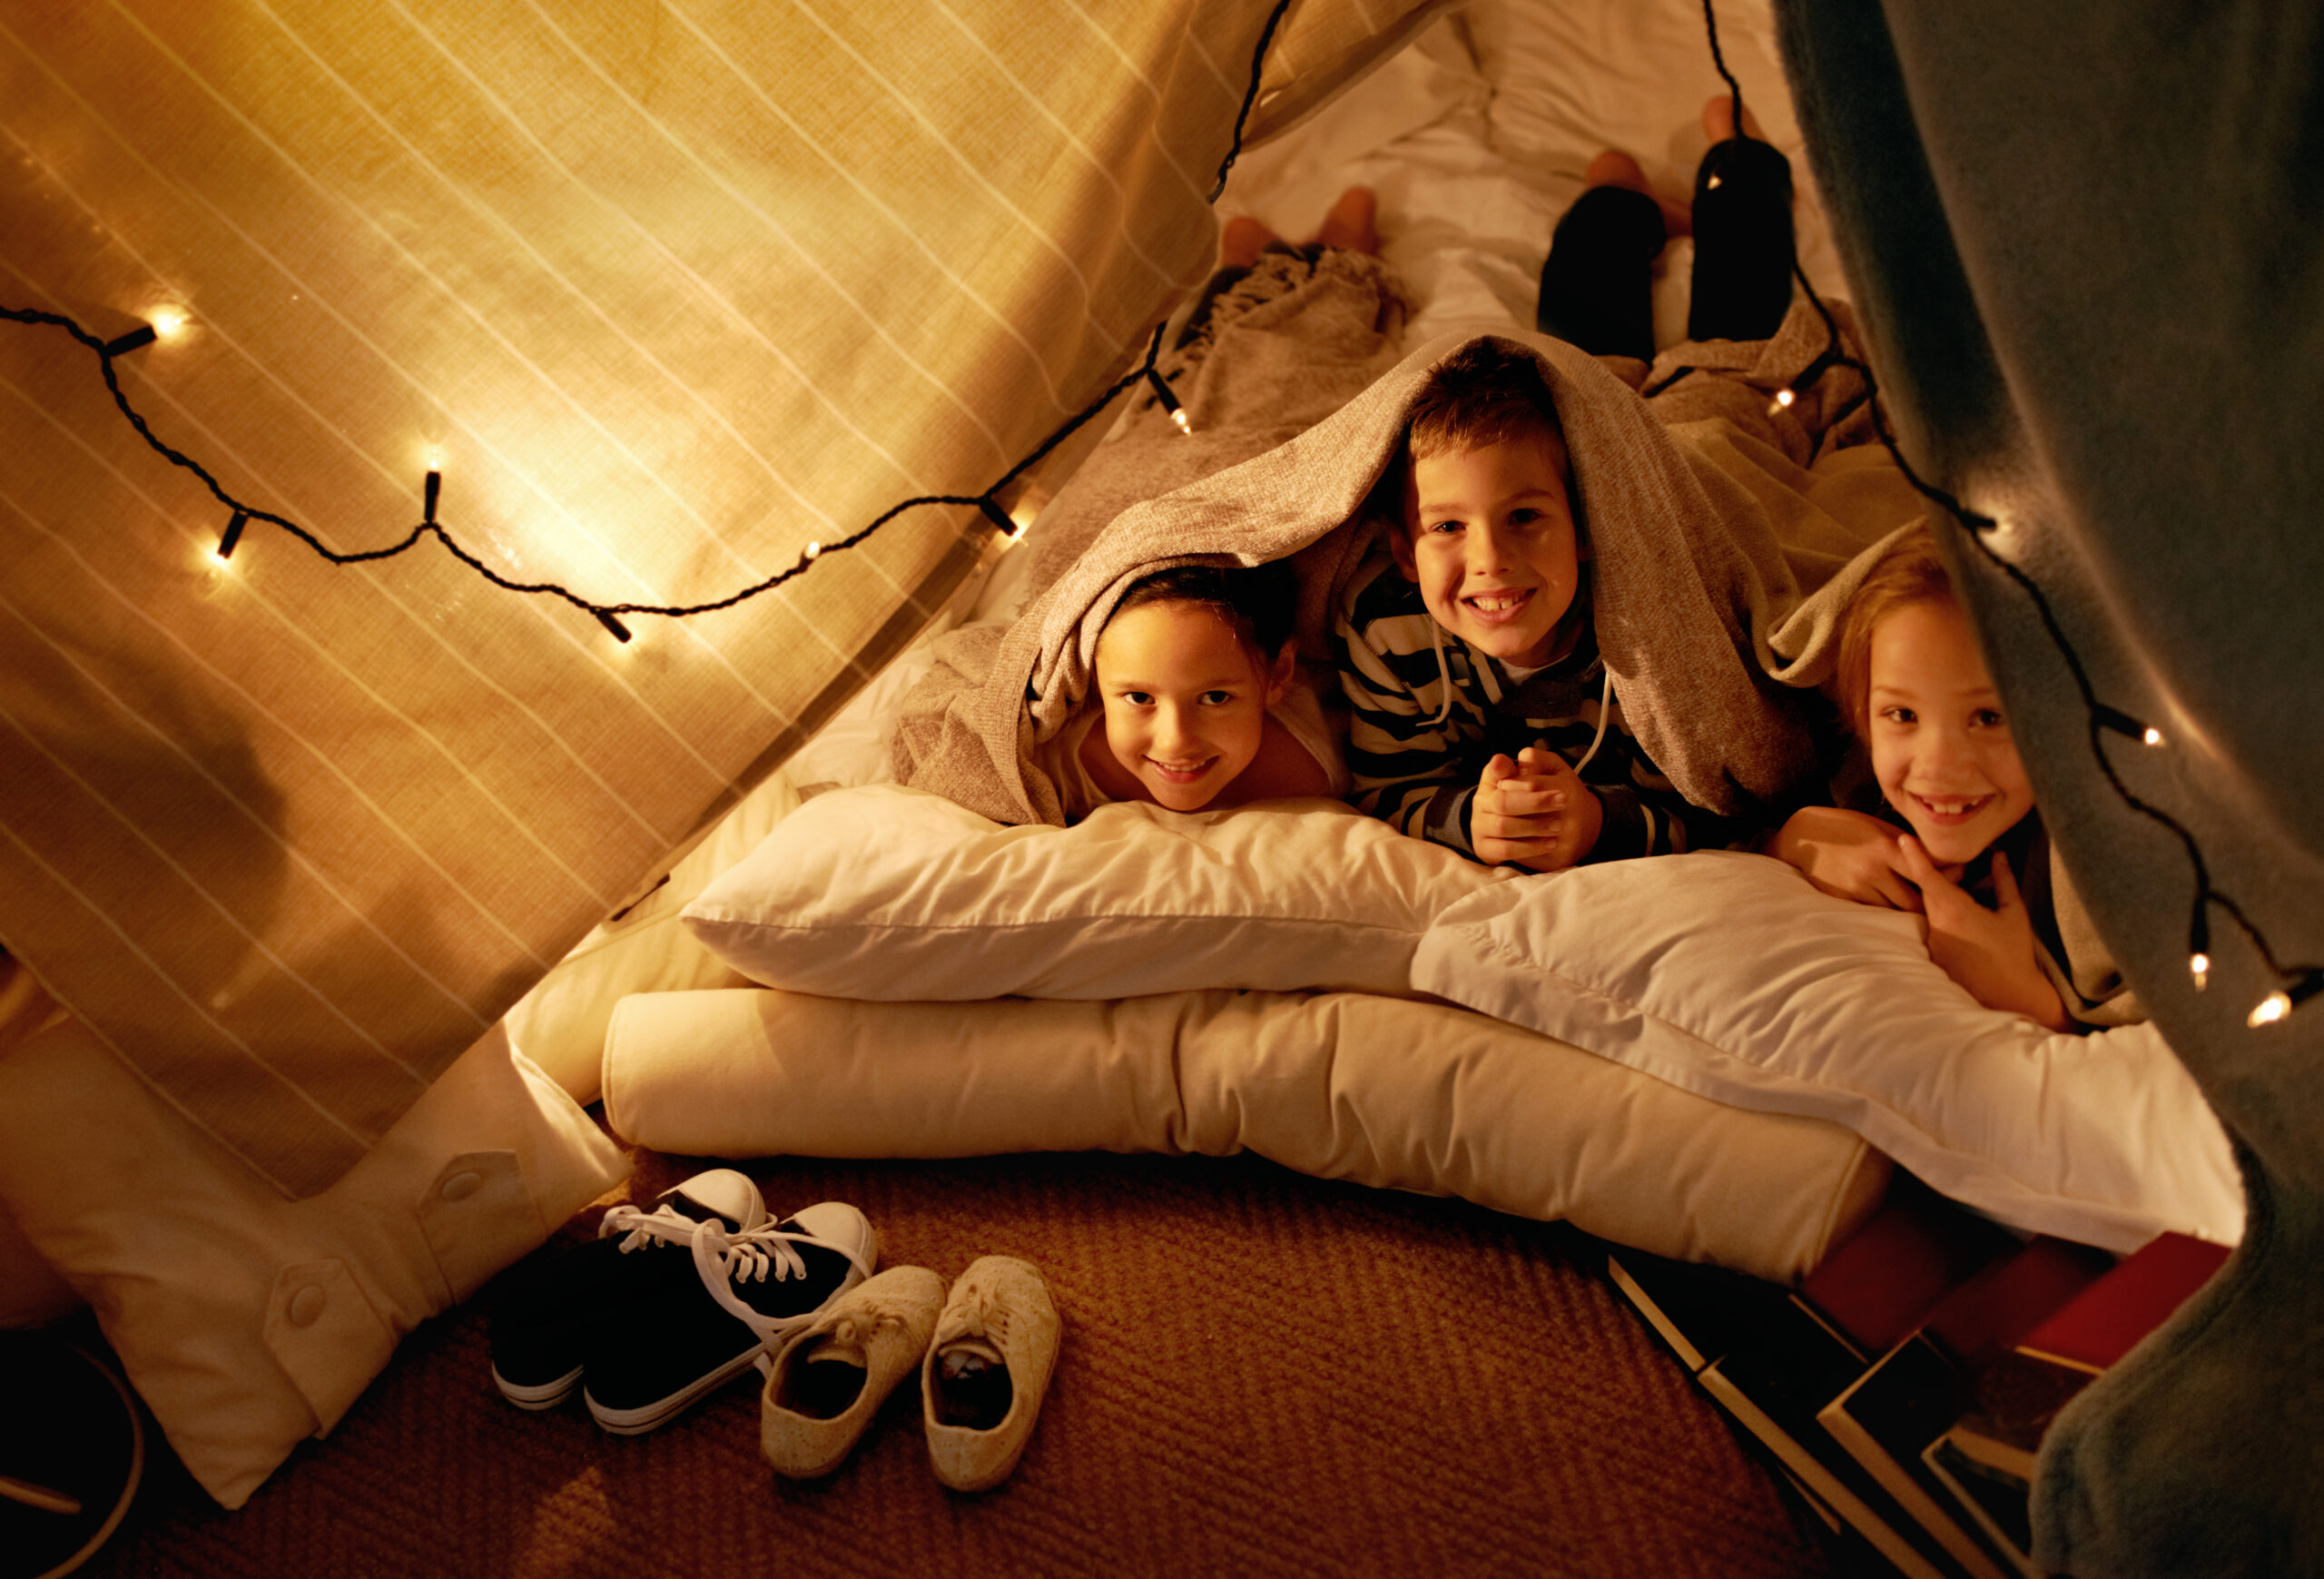 https://www.imom.com/wp-content/uploads/2014/06/6-16-23-indoor-camping-ideas-for-kids-scaled.jpg